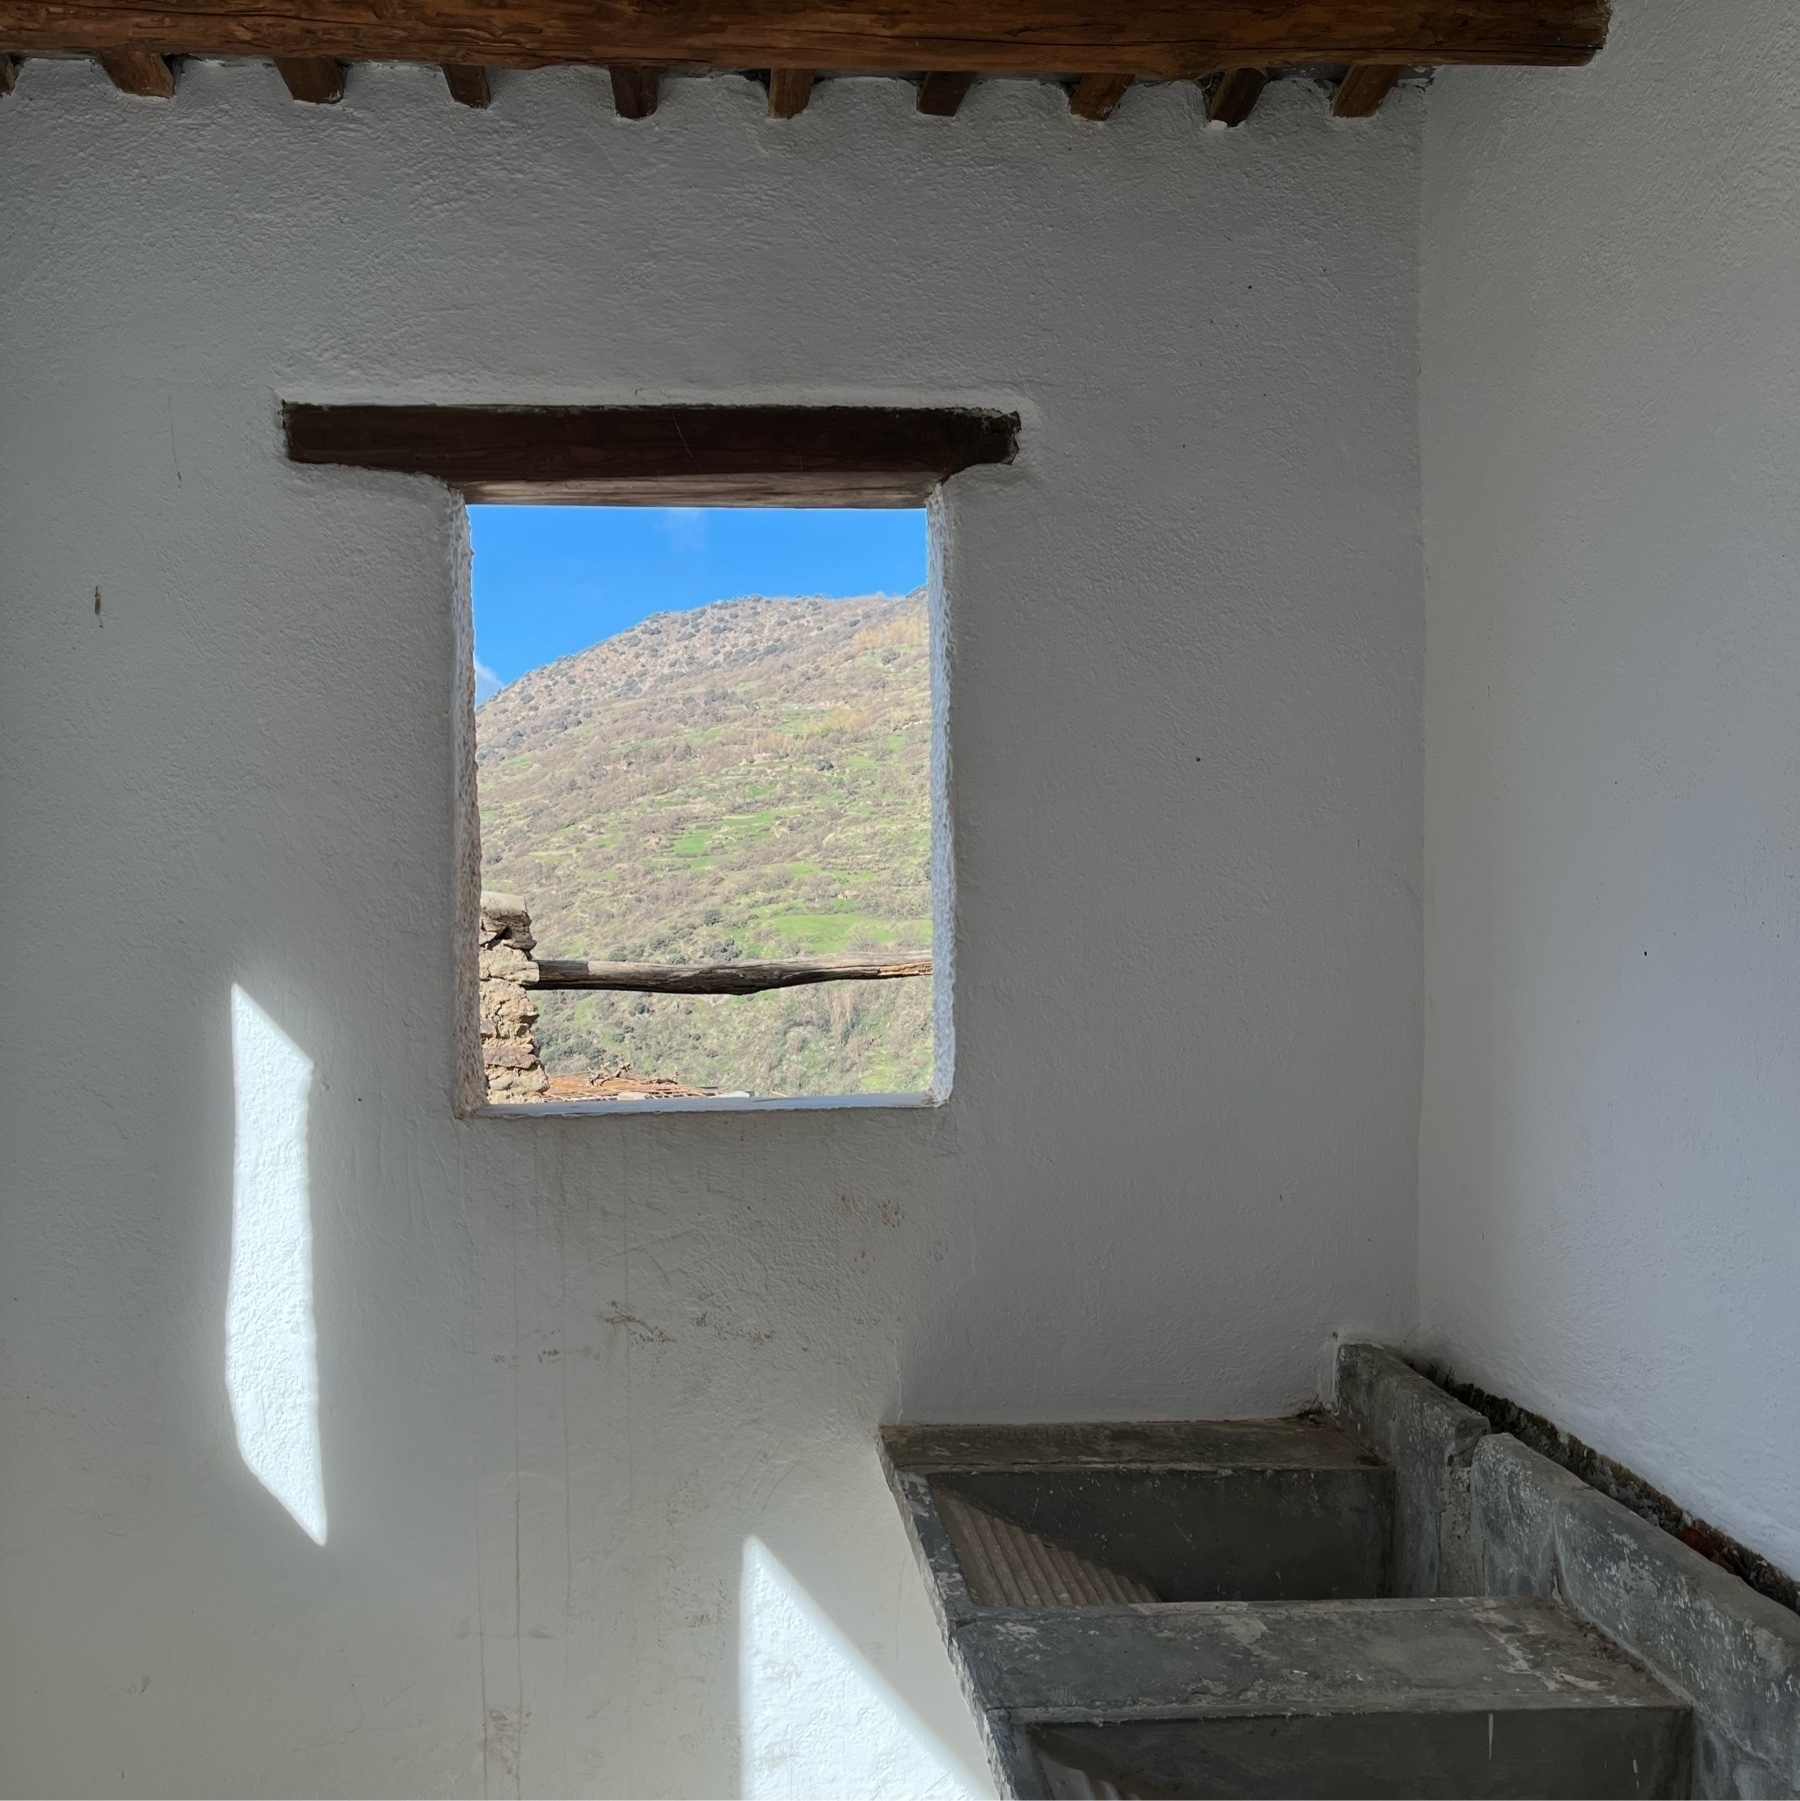 Window with views into the mountains